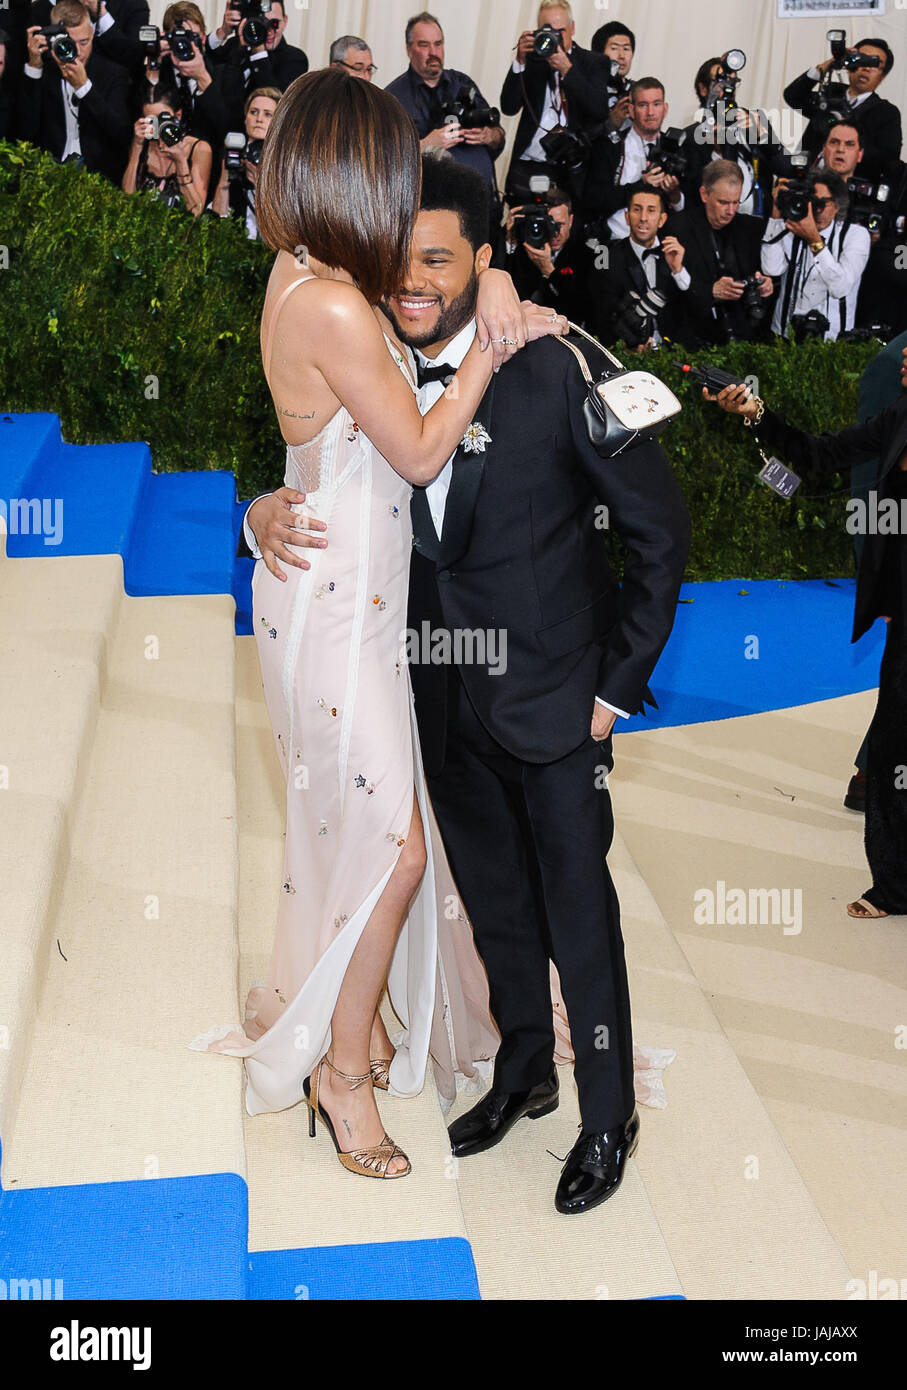 The Met Gala 2017 - Arrivals Featuring: The Weeknd, Selena Gomez Where: New  York, United States When: 01 May 2017 Credit: WENN.com Stock Photo - Alamy